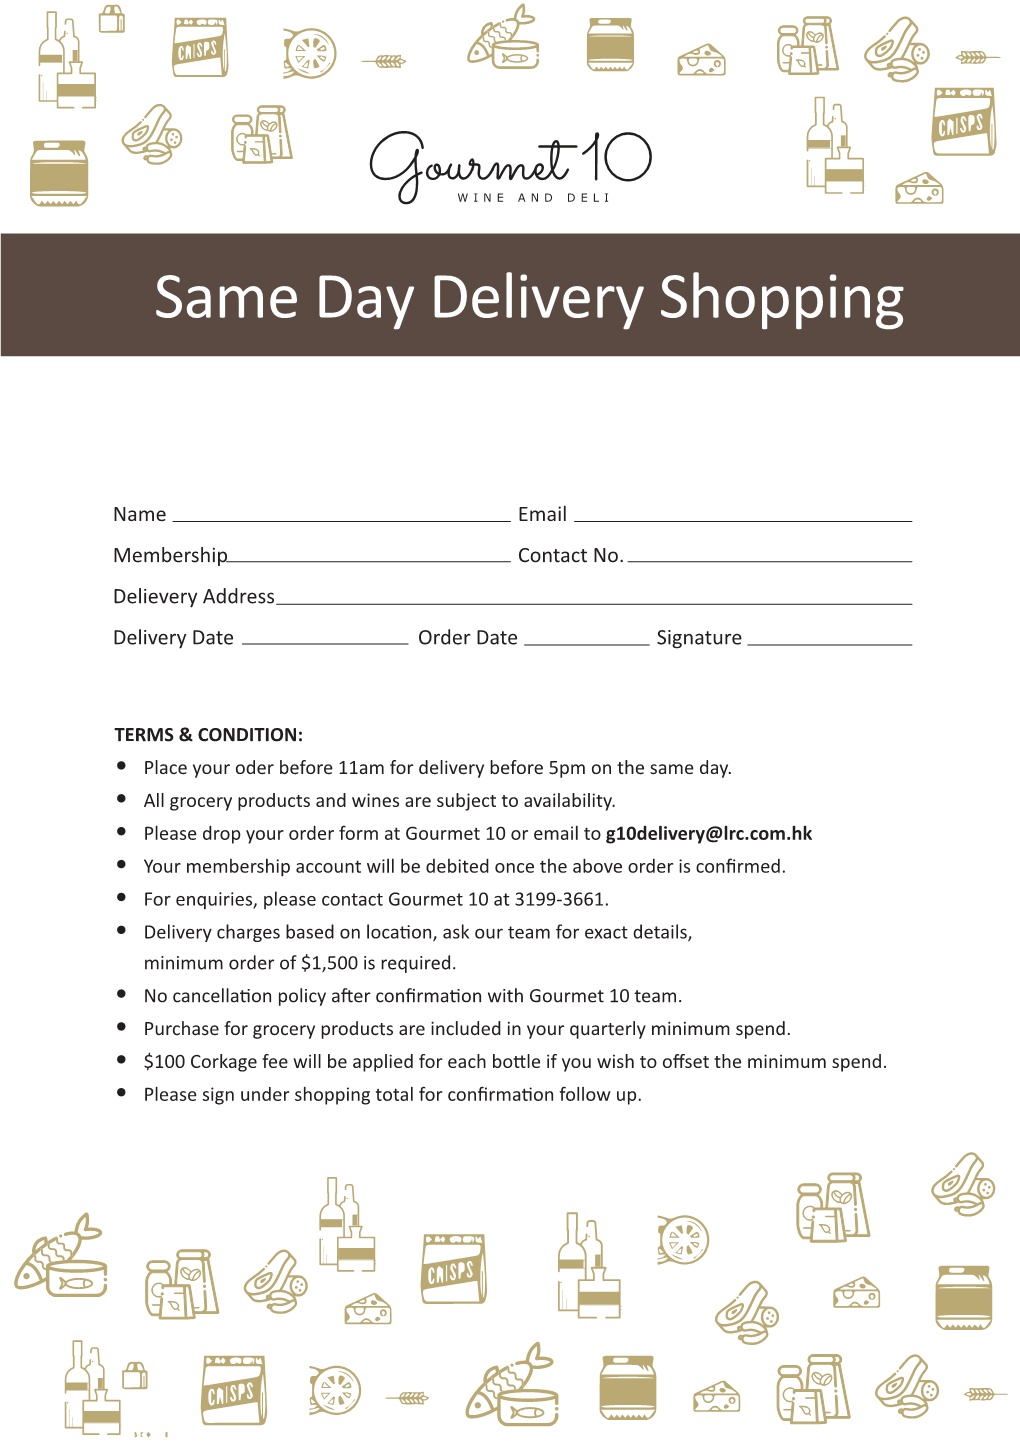 Same Day Delivery Shopping